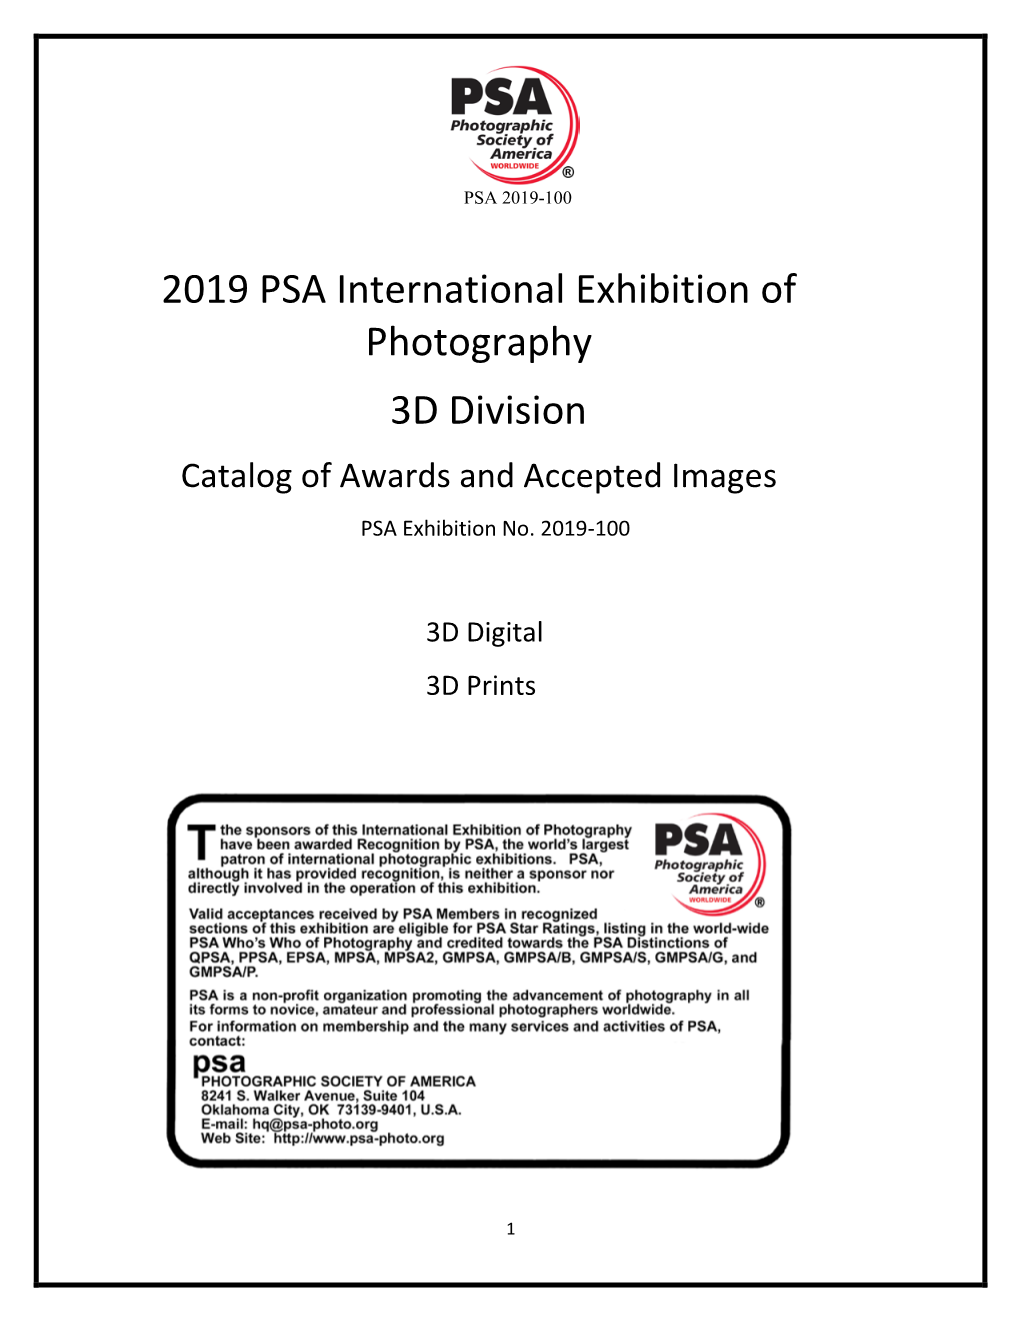 2019 PSA International Exhibition of Photography 3D Division Catalog of Awards and Accepted Images PSA Exhibition No